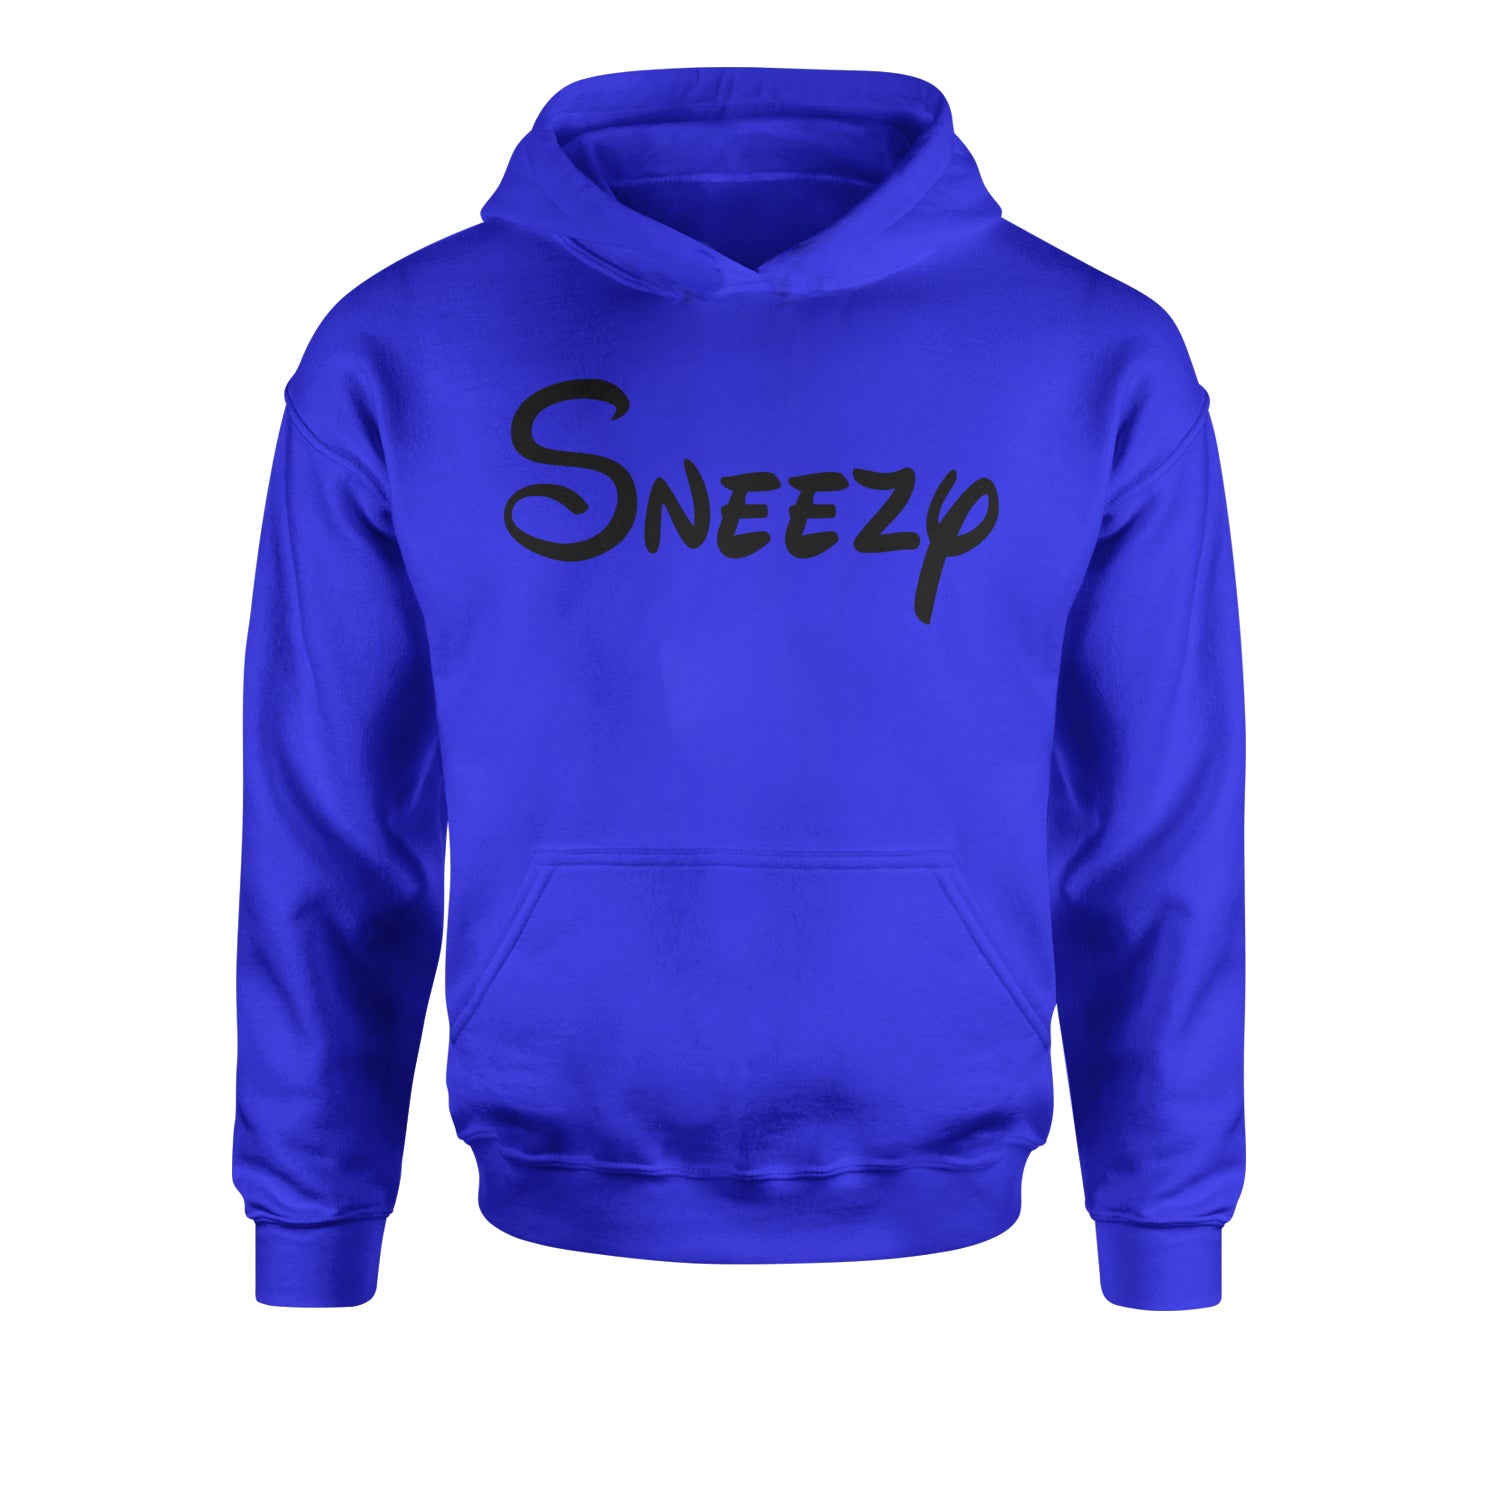 Sneezy - 7 Dwarfs Costume Youth-Sized Hoodie and, costume, dwarfs, group, halloween, matching, seven, snow, the, white by Expression Tees